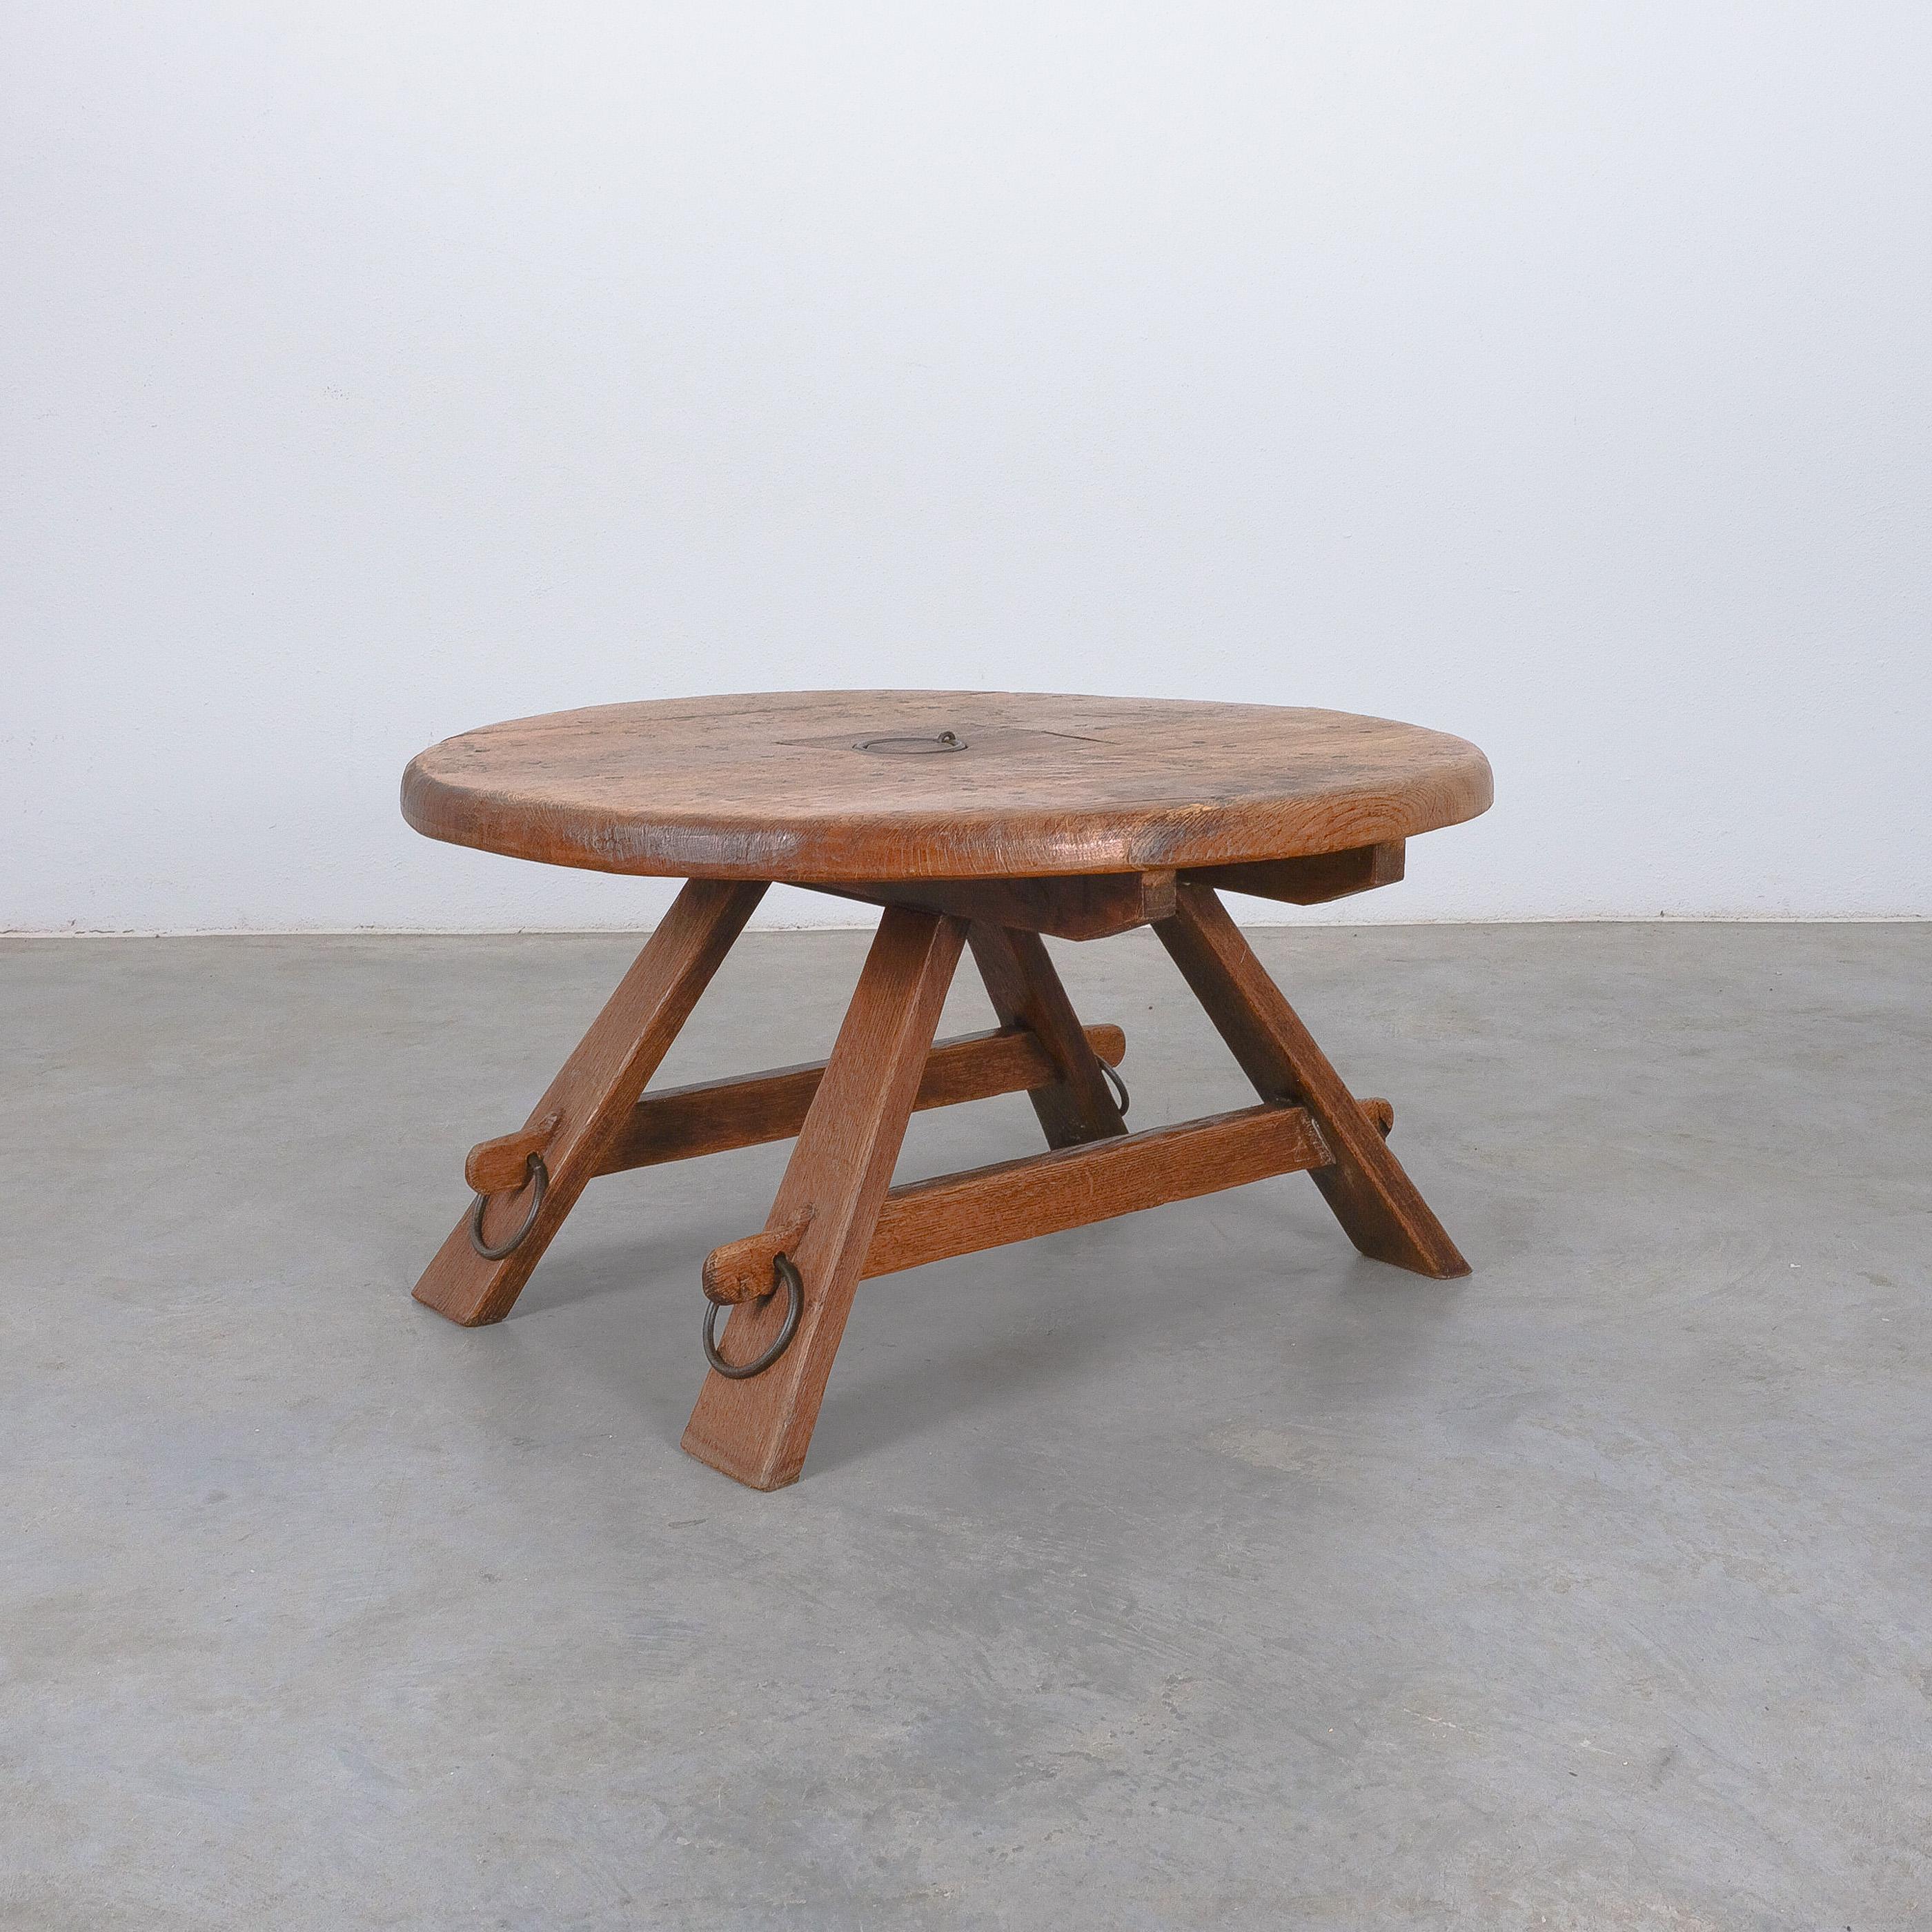 Mid-century 34.25“ carved oak table from French oak, circa 1950

Impressive brutalist handmade coffee table in the manner of Jean Touret and Atelier Marolles. The table is made of solid French oak. It's in very good vintage condition showing all the